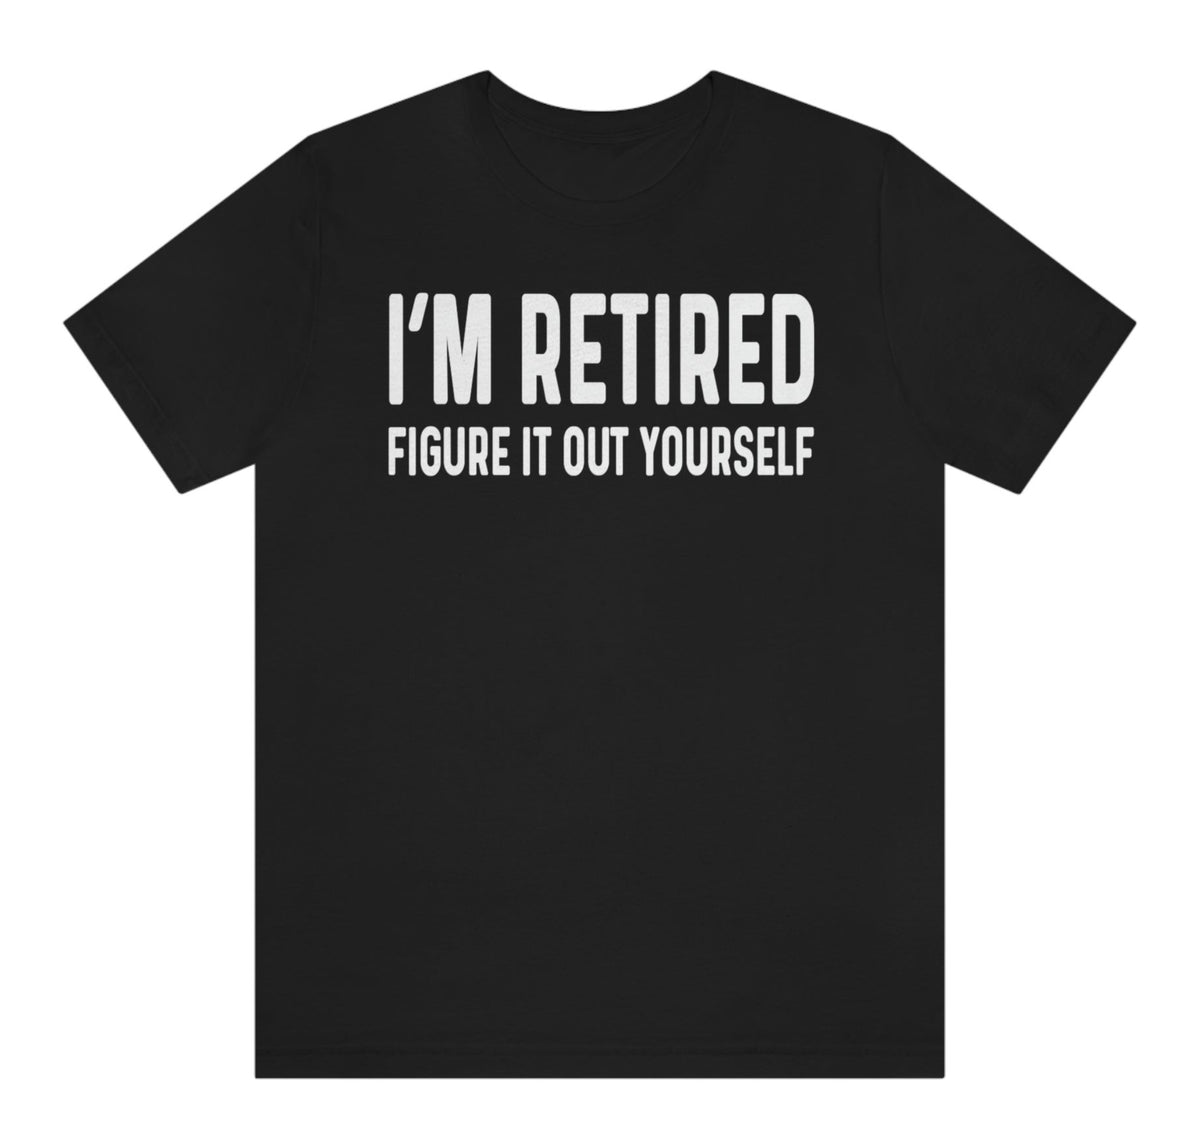 I'm Retired Shirt - Figure it Out Yourself